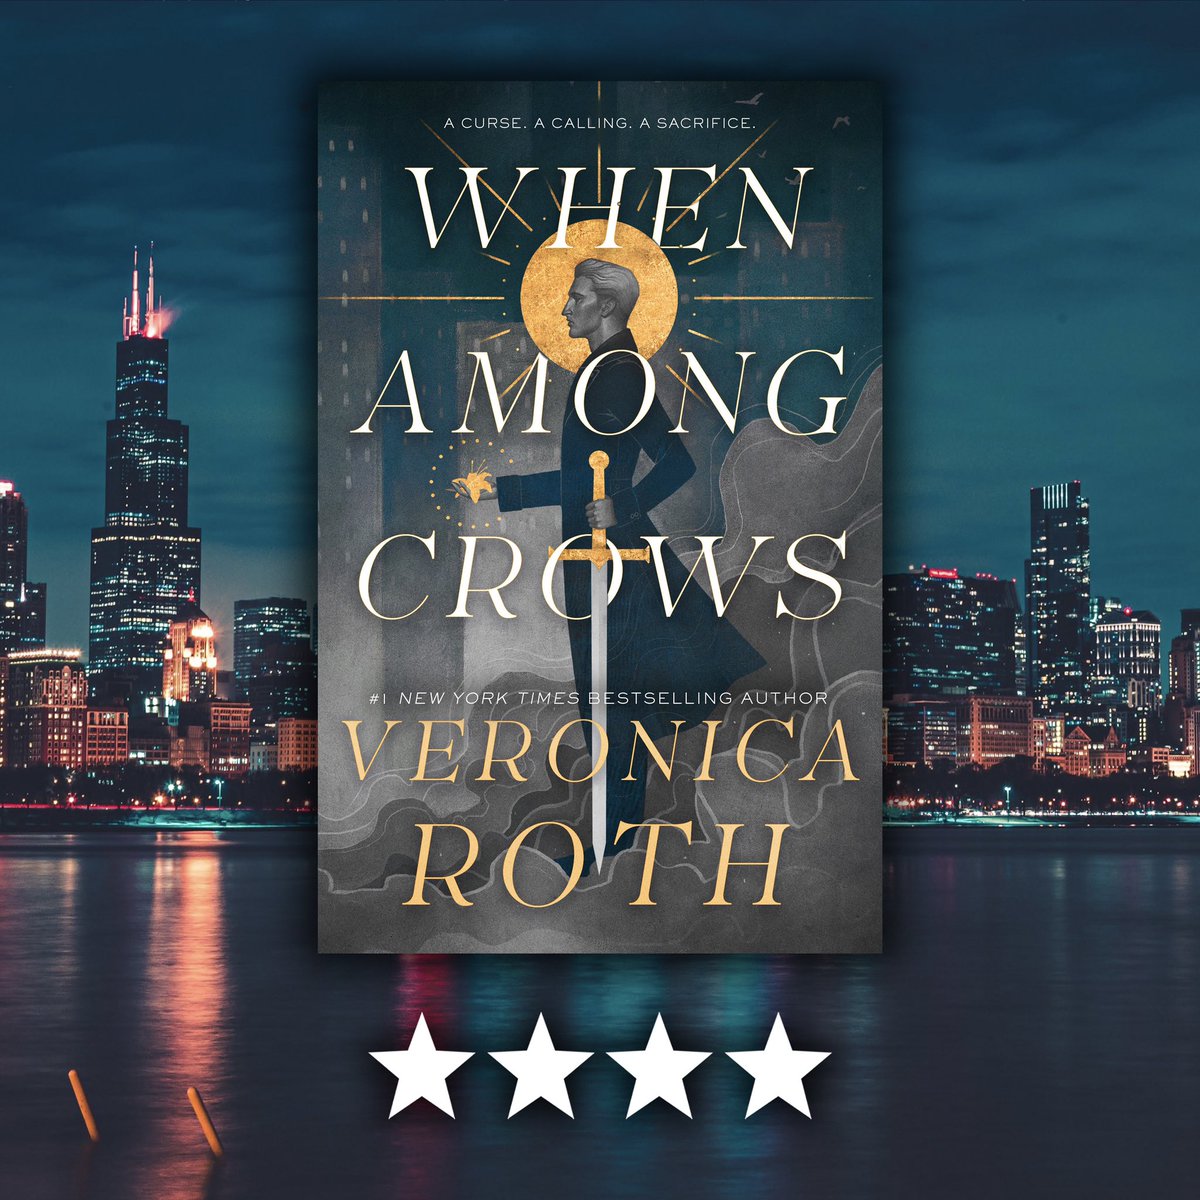 ⭐️⭐️⭐️⭐️ to When Among Crows by Veronica Roth, a tight, well-told urban fantasy that’s like The Witcher set in modern day Chicago. My biggest criticisms were an undercooked romance and a desire for MORE—more world and character development. Here’s hoping for a sequel🤞
@torbooks